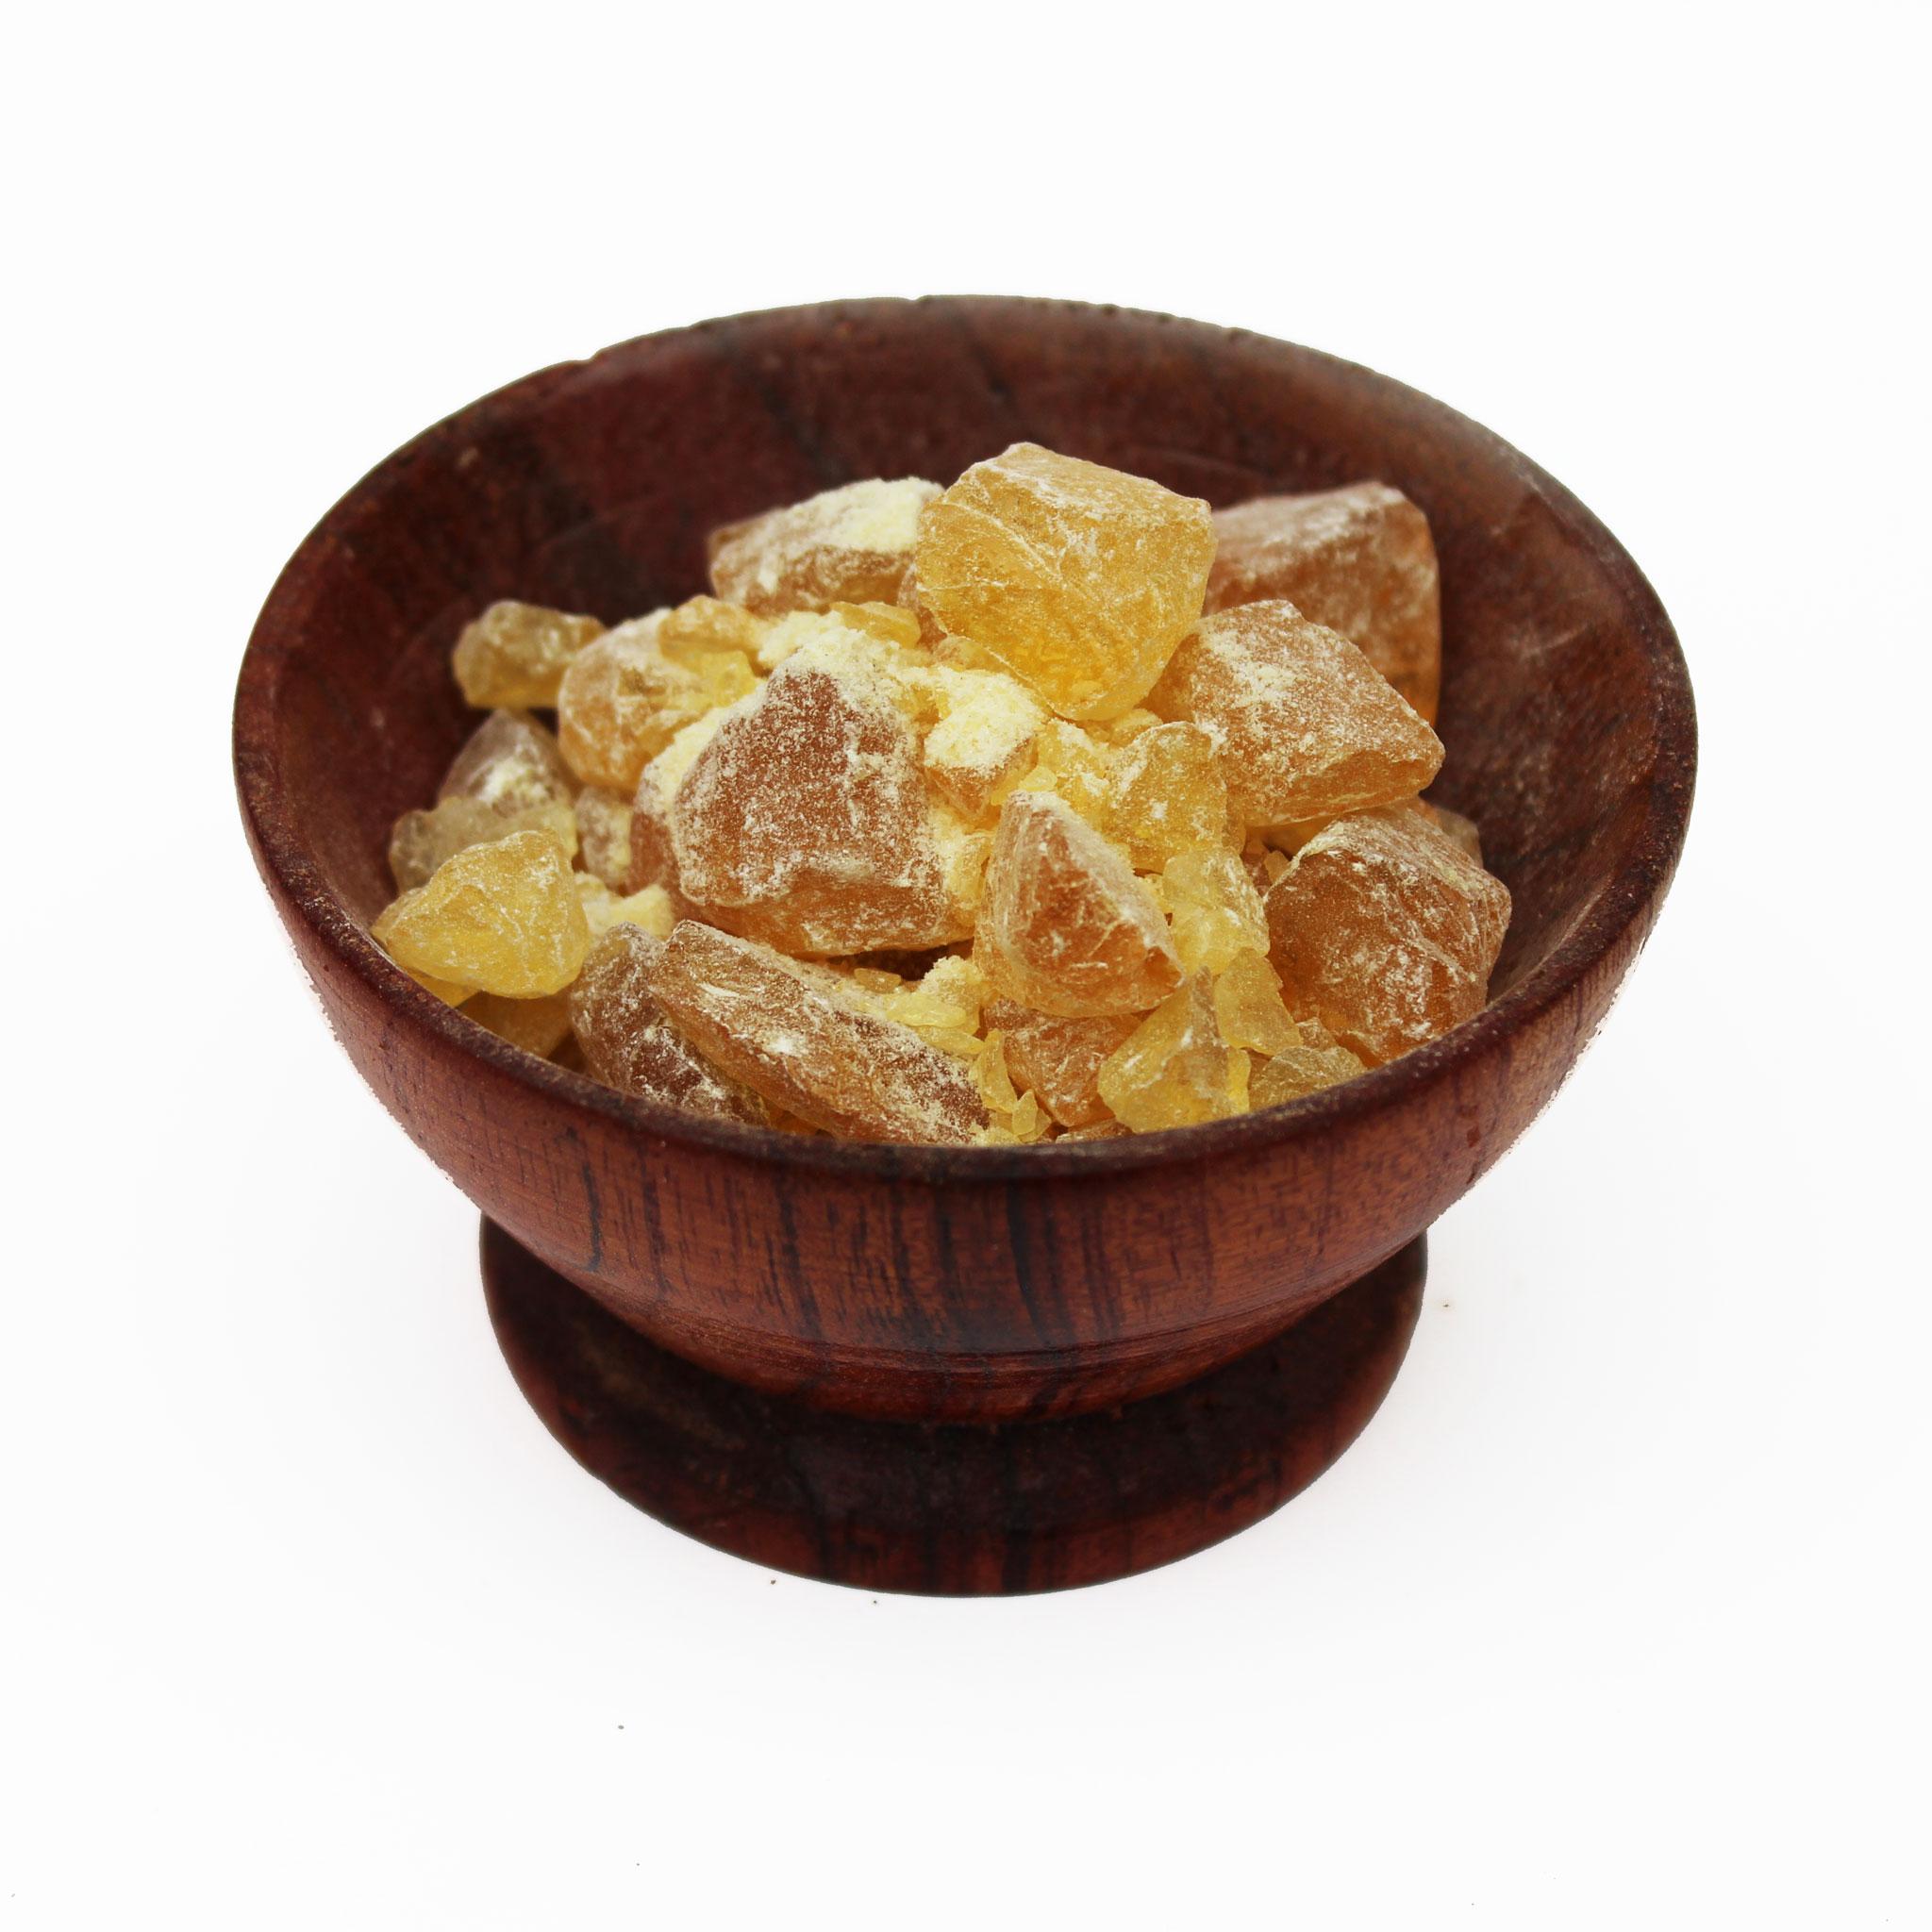 Pinus Tree Gum Aromatherapy Incense Details about   Pine Resin Natural 